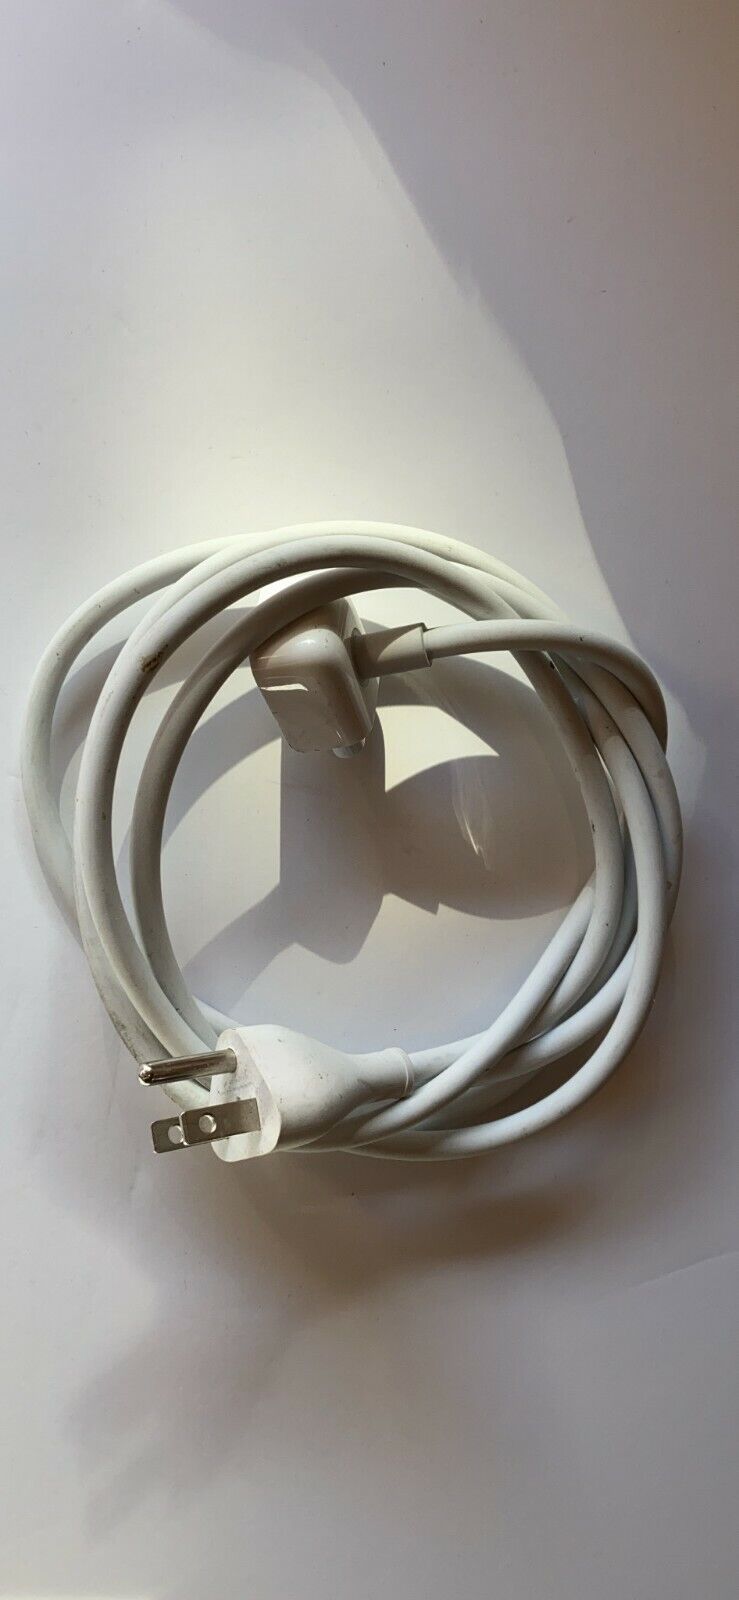 Authentic Apple Mac Macbook Power Adapter Charger Extension Cord Cable 6 Ft